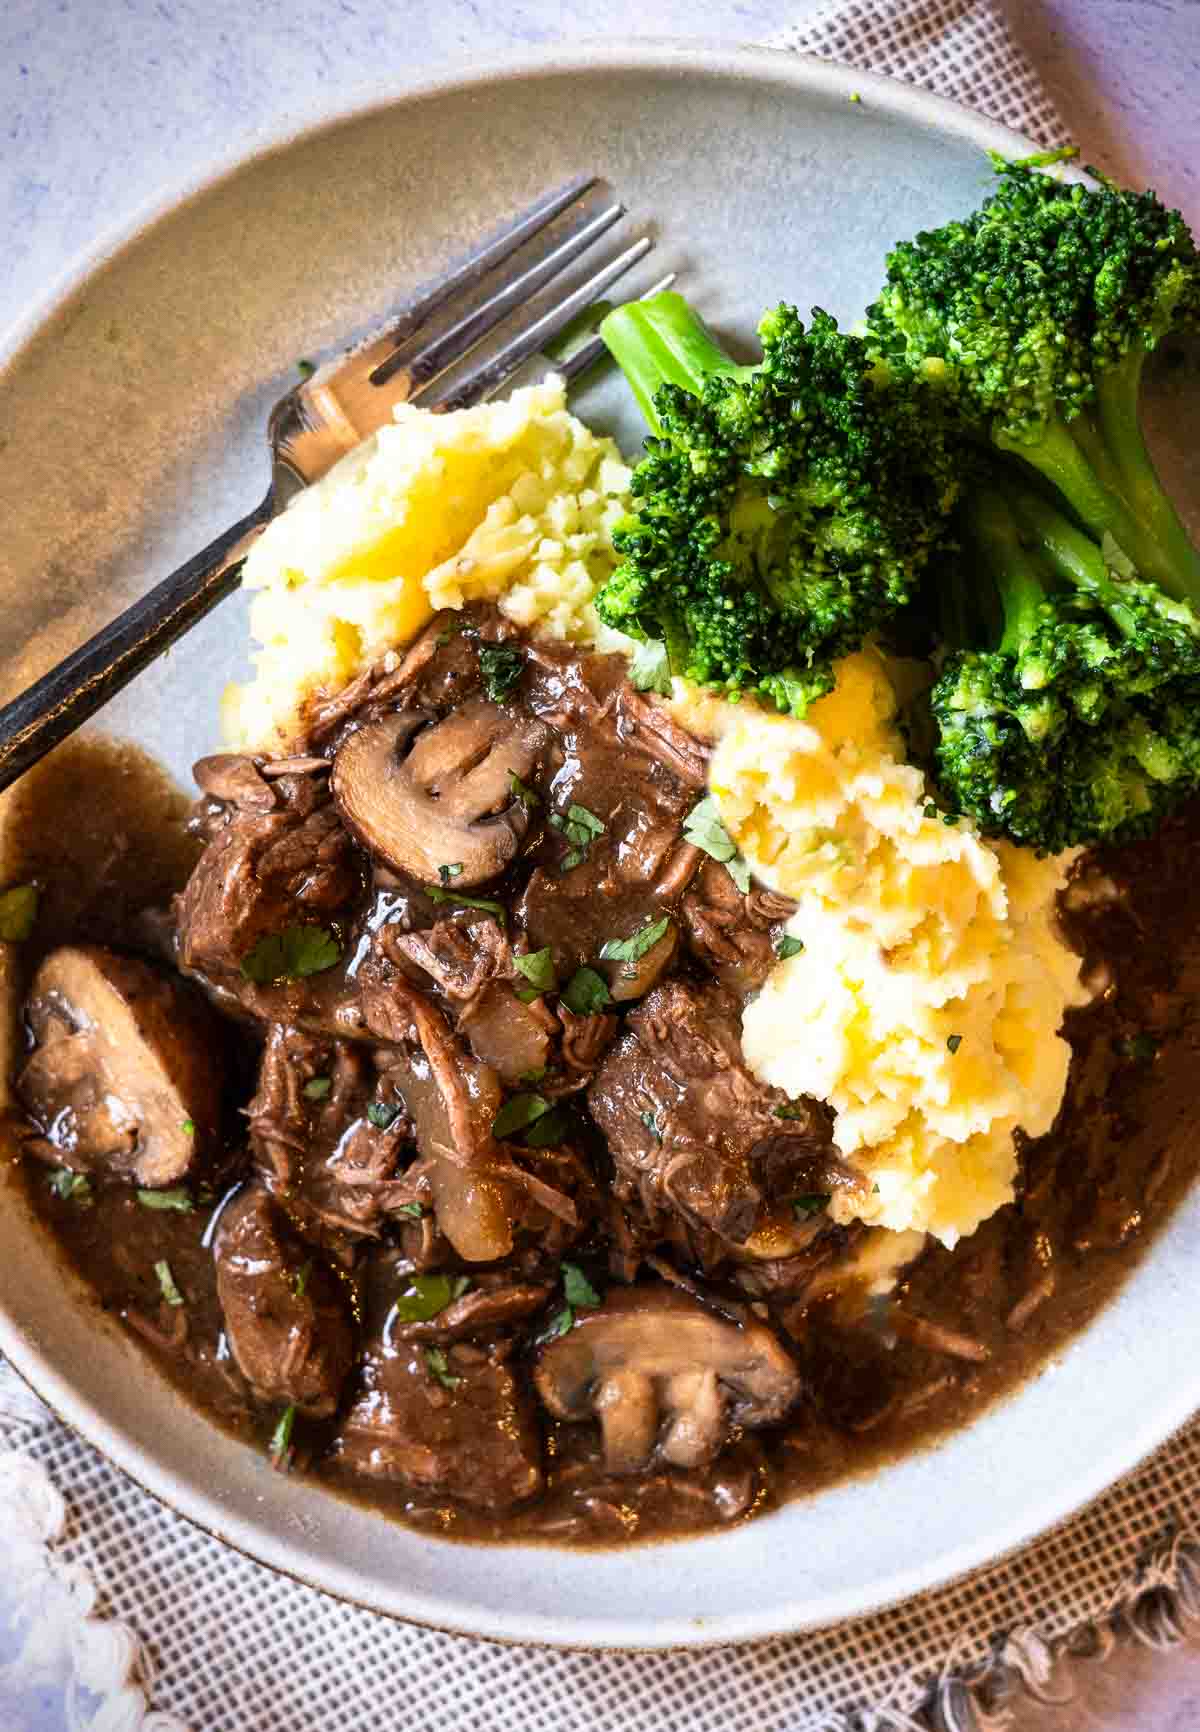 Slow cooker beef tips with gravy served with mashed potatoes and broccoli.